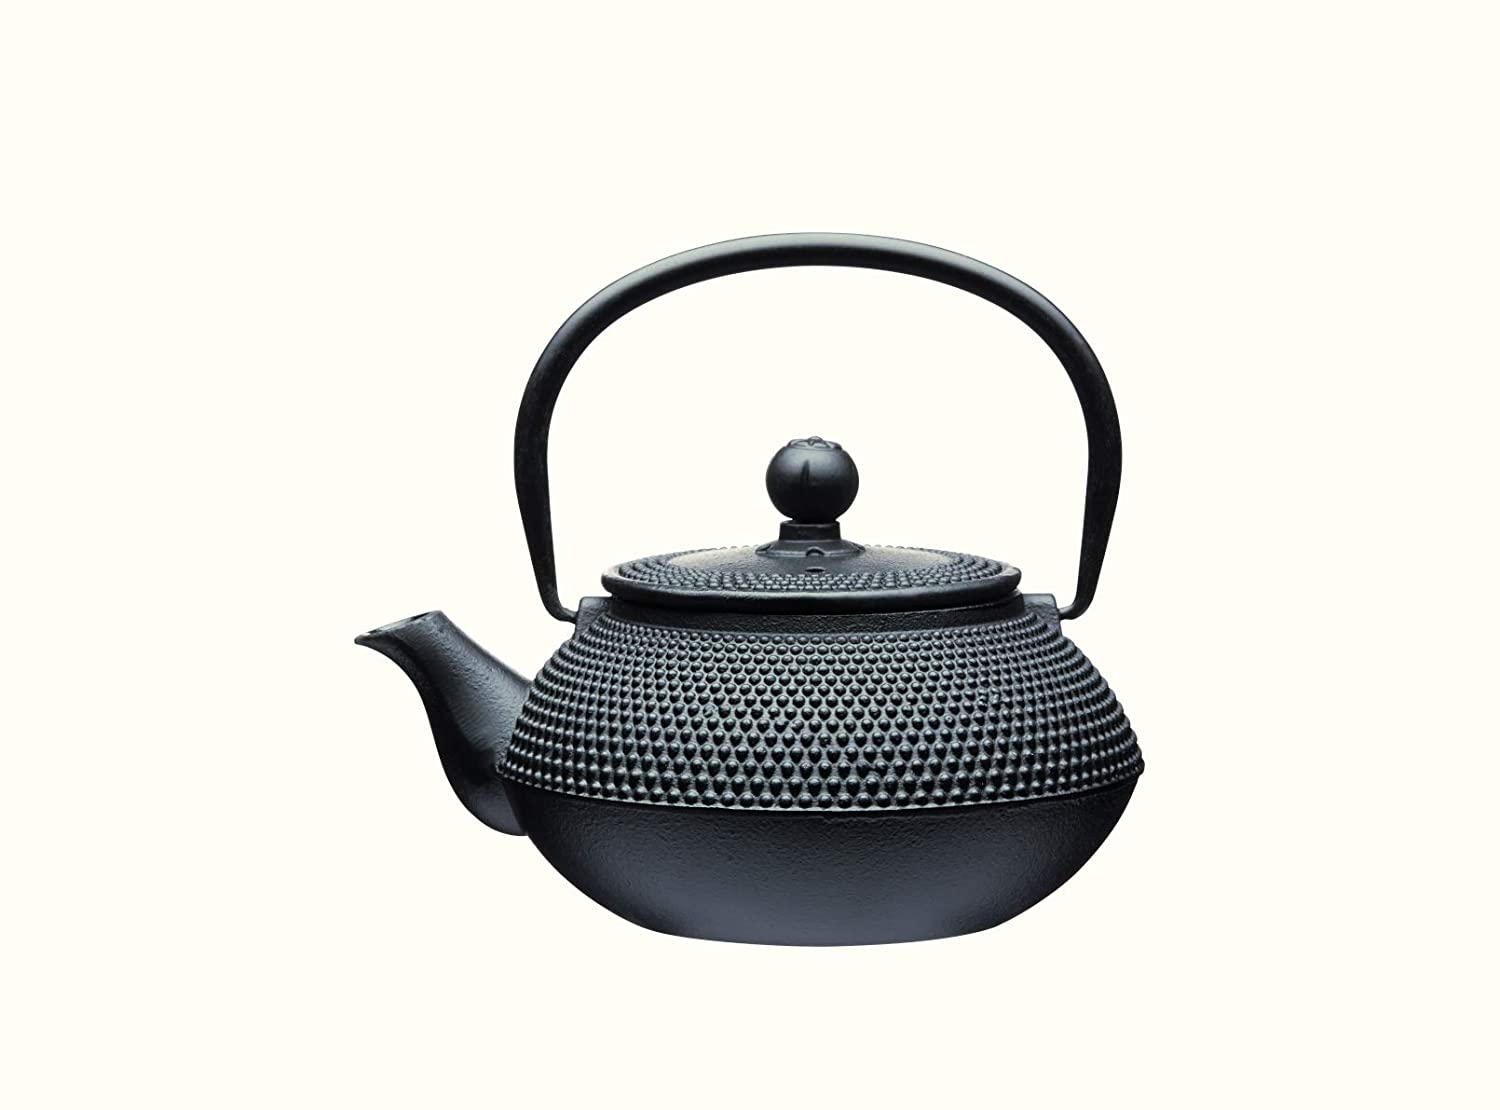 KitchenCraft Le\'Xpress Japanese Style Cast Iron Tea Infuser Teapot, 600 ml (3 Cups)